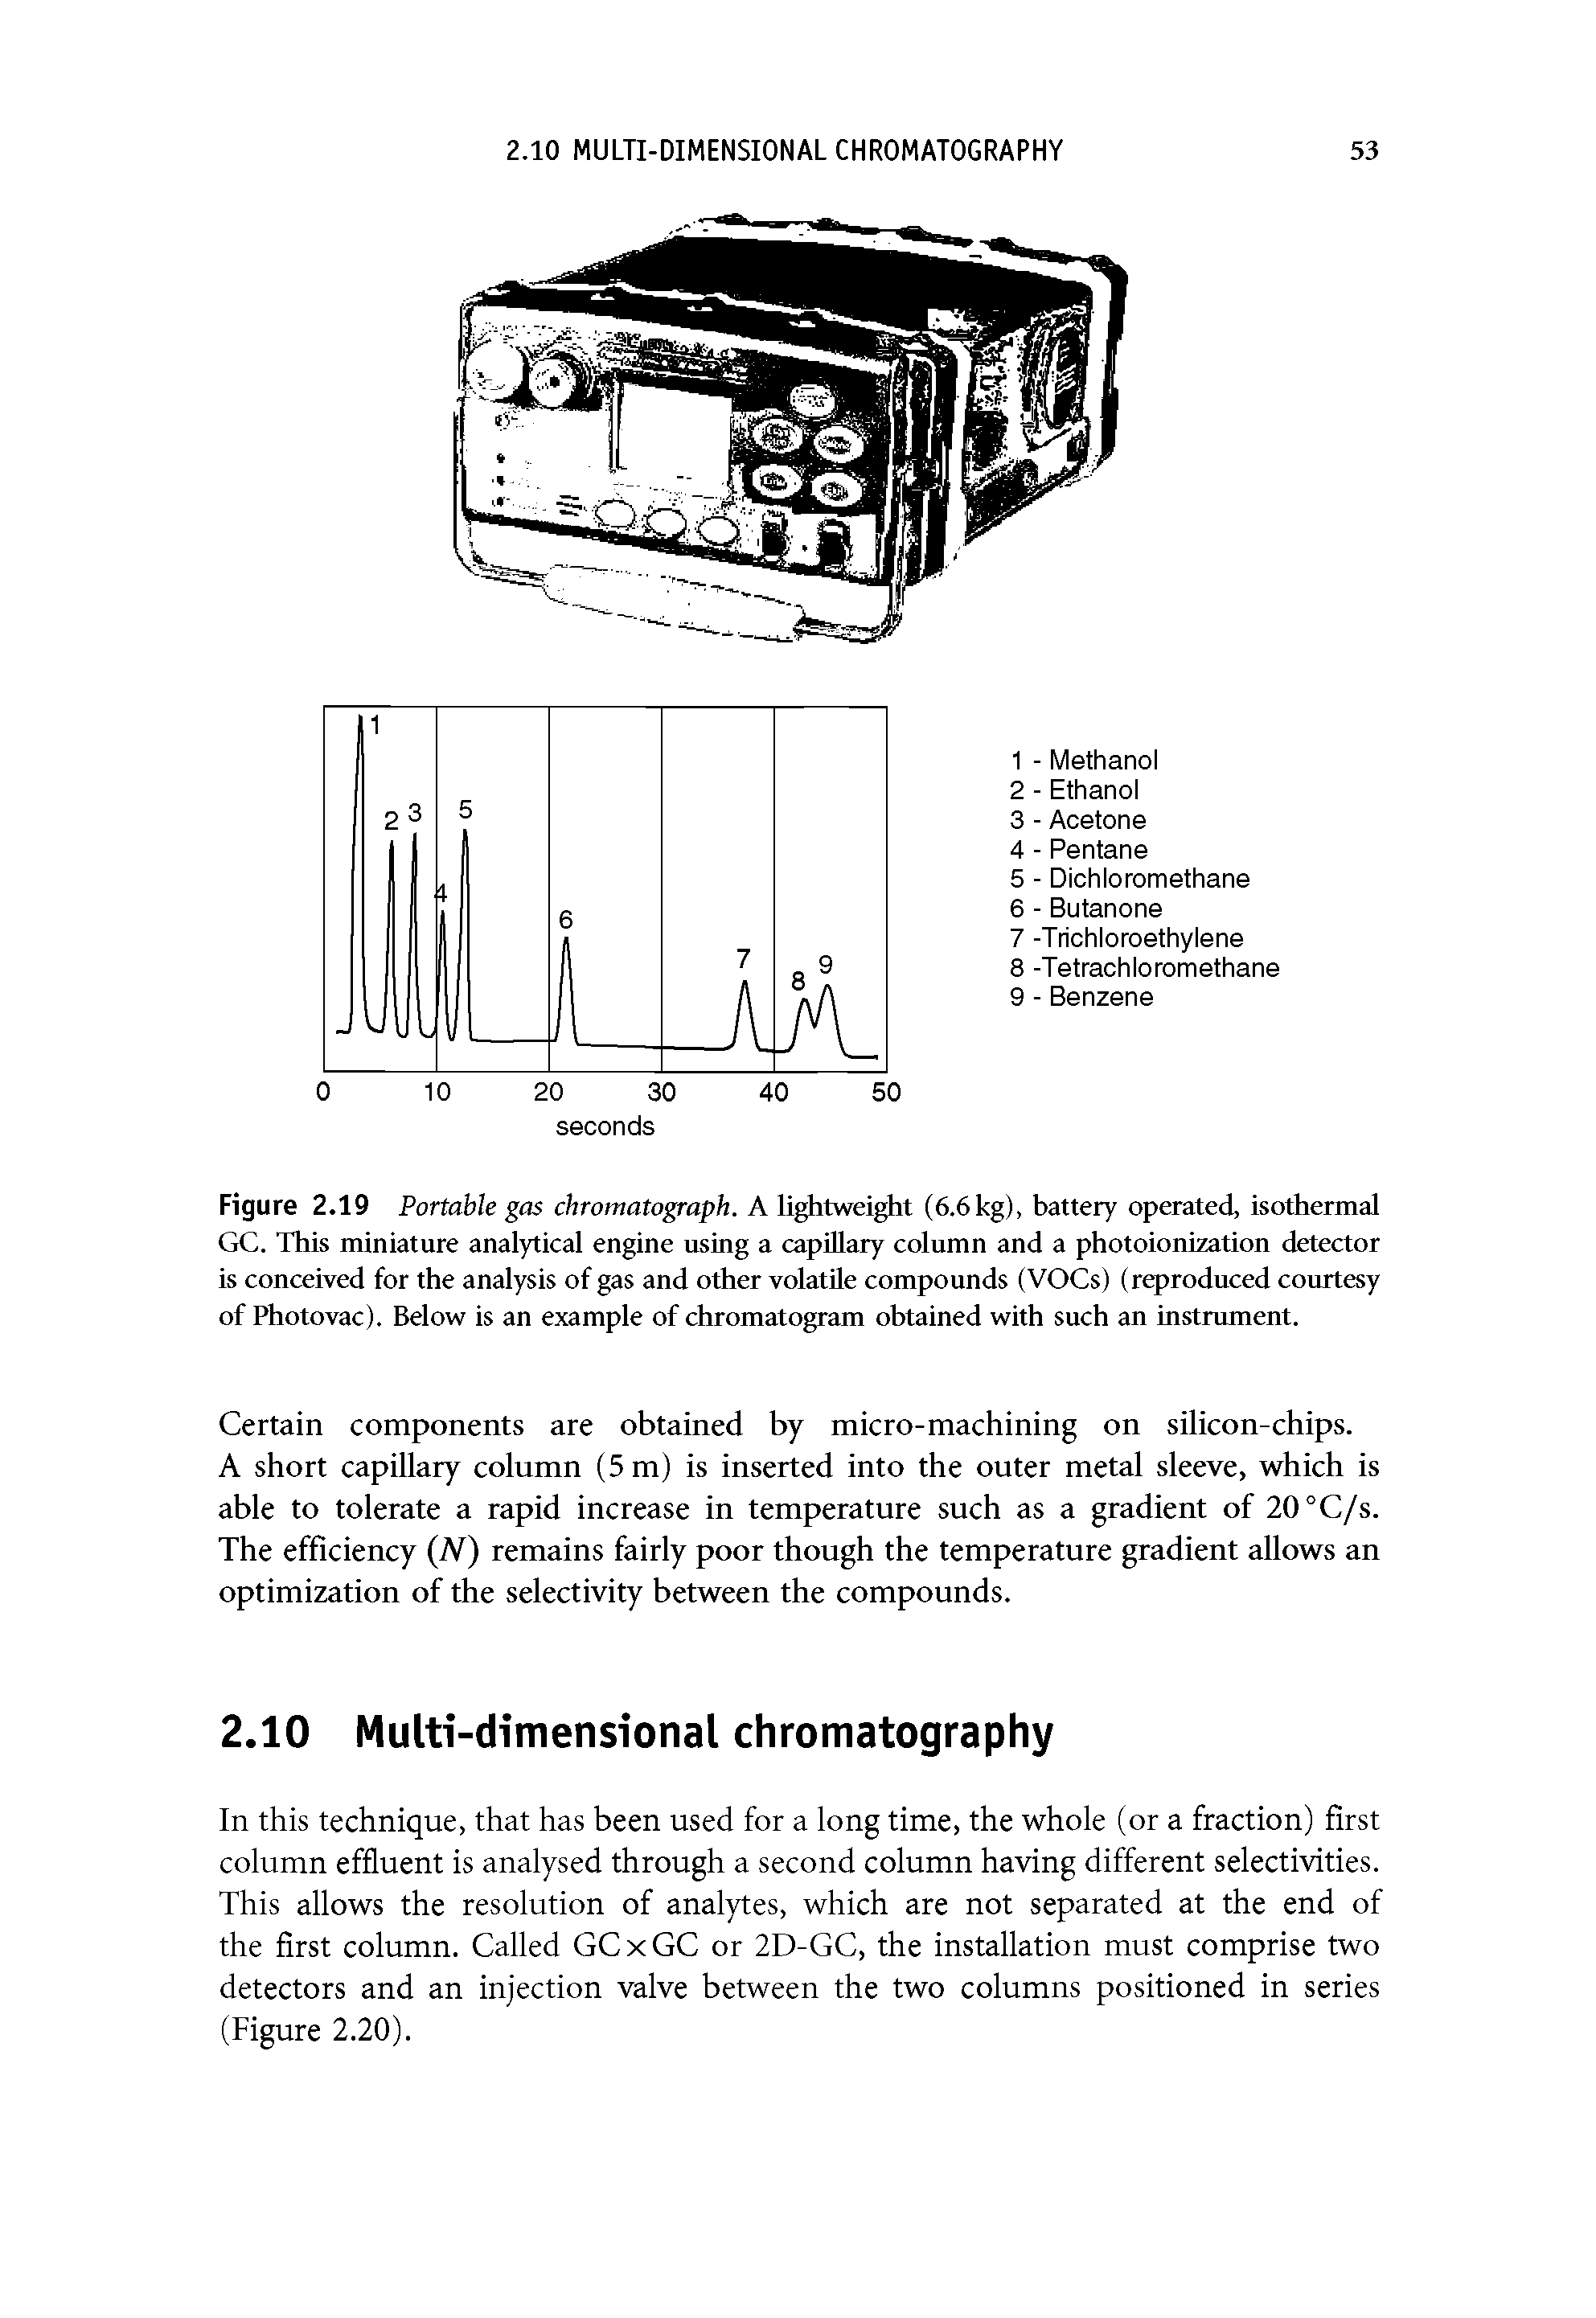 Figure 2.19 Portable gas chromatograph. A lightweight (6.6kg), battery operated, isothermal GC. This miniature analytical engine using a capillary column and a photoionization detector is conceived for the analysis of gas and other volatile compounds (VOCs) (reproduced courtesy of Photovac). Below is an example of chromatogram obtained with such an instrument.